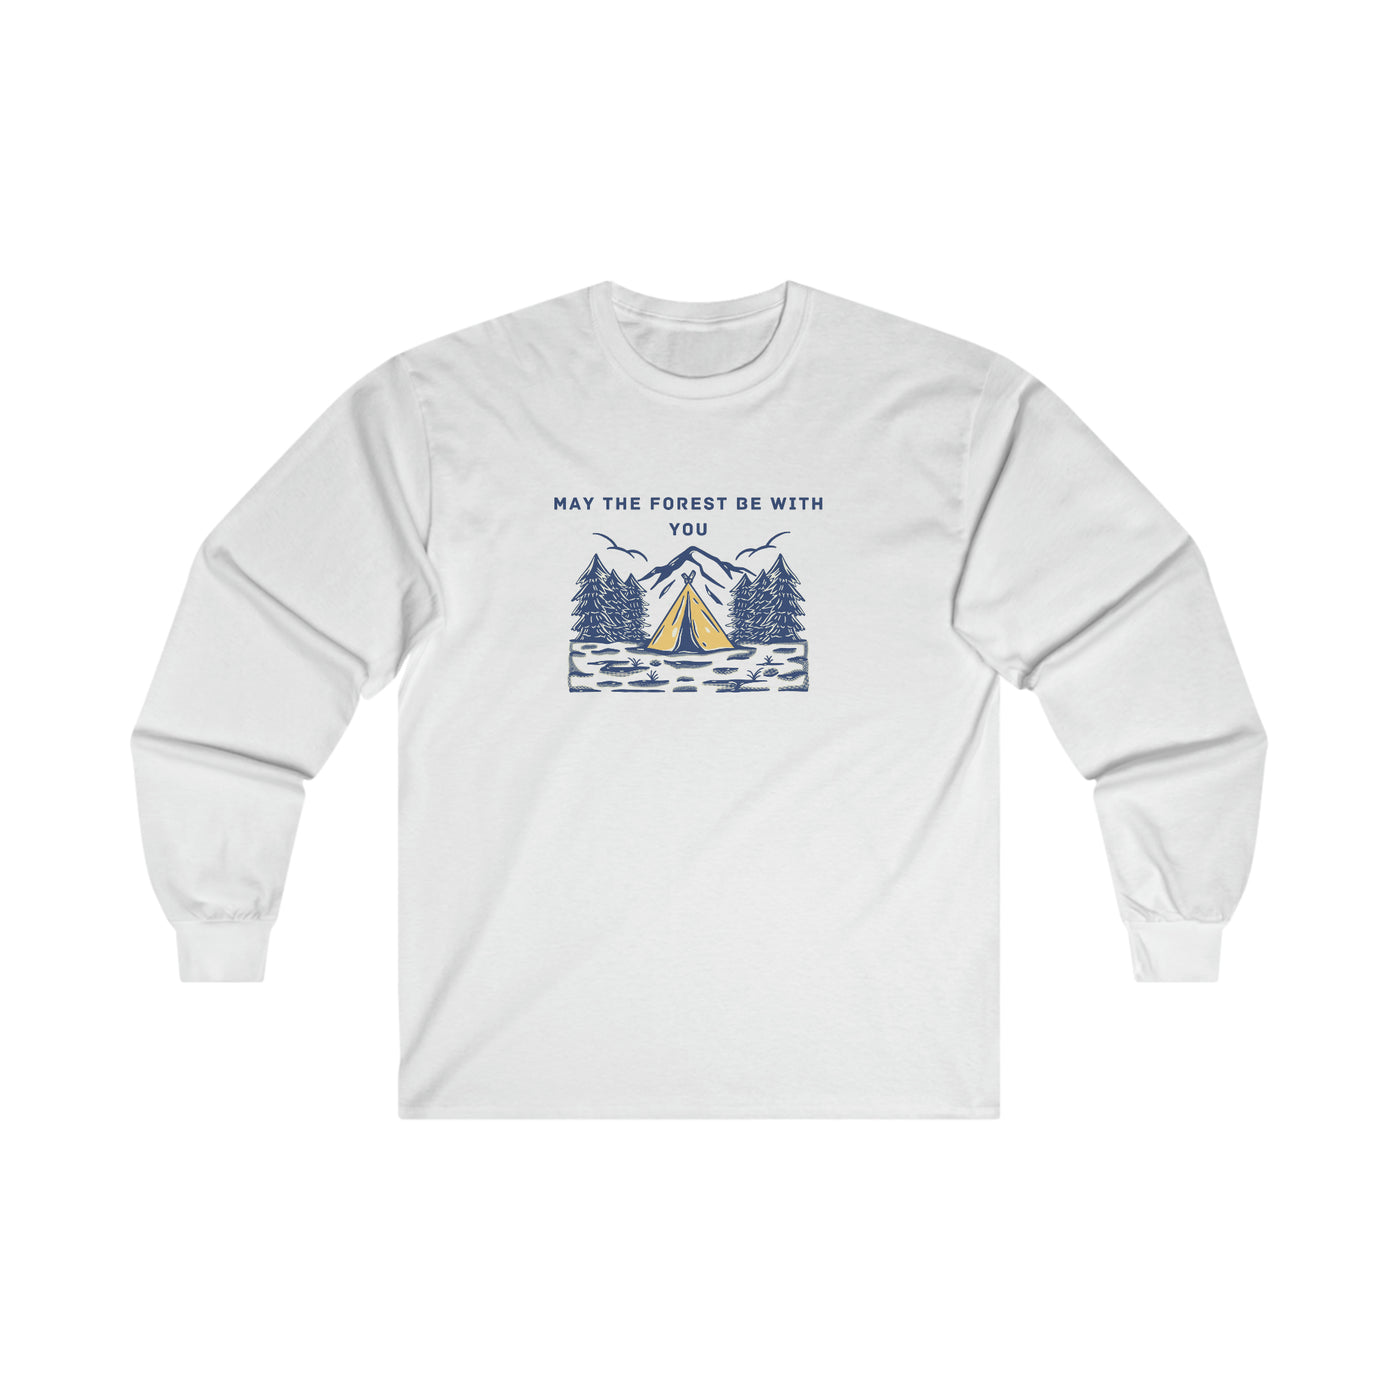 May the forest be with you Ultra Cotton Long Sleeve Tee